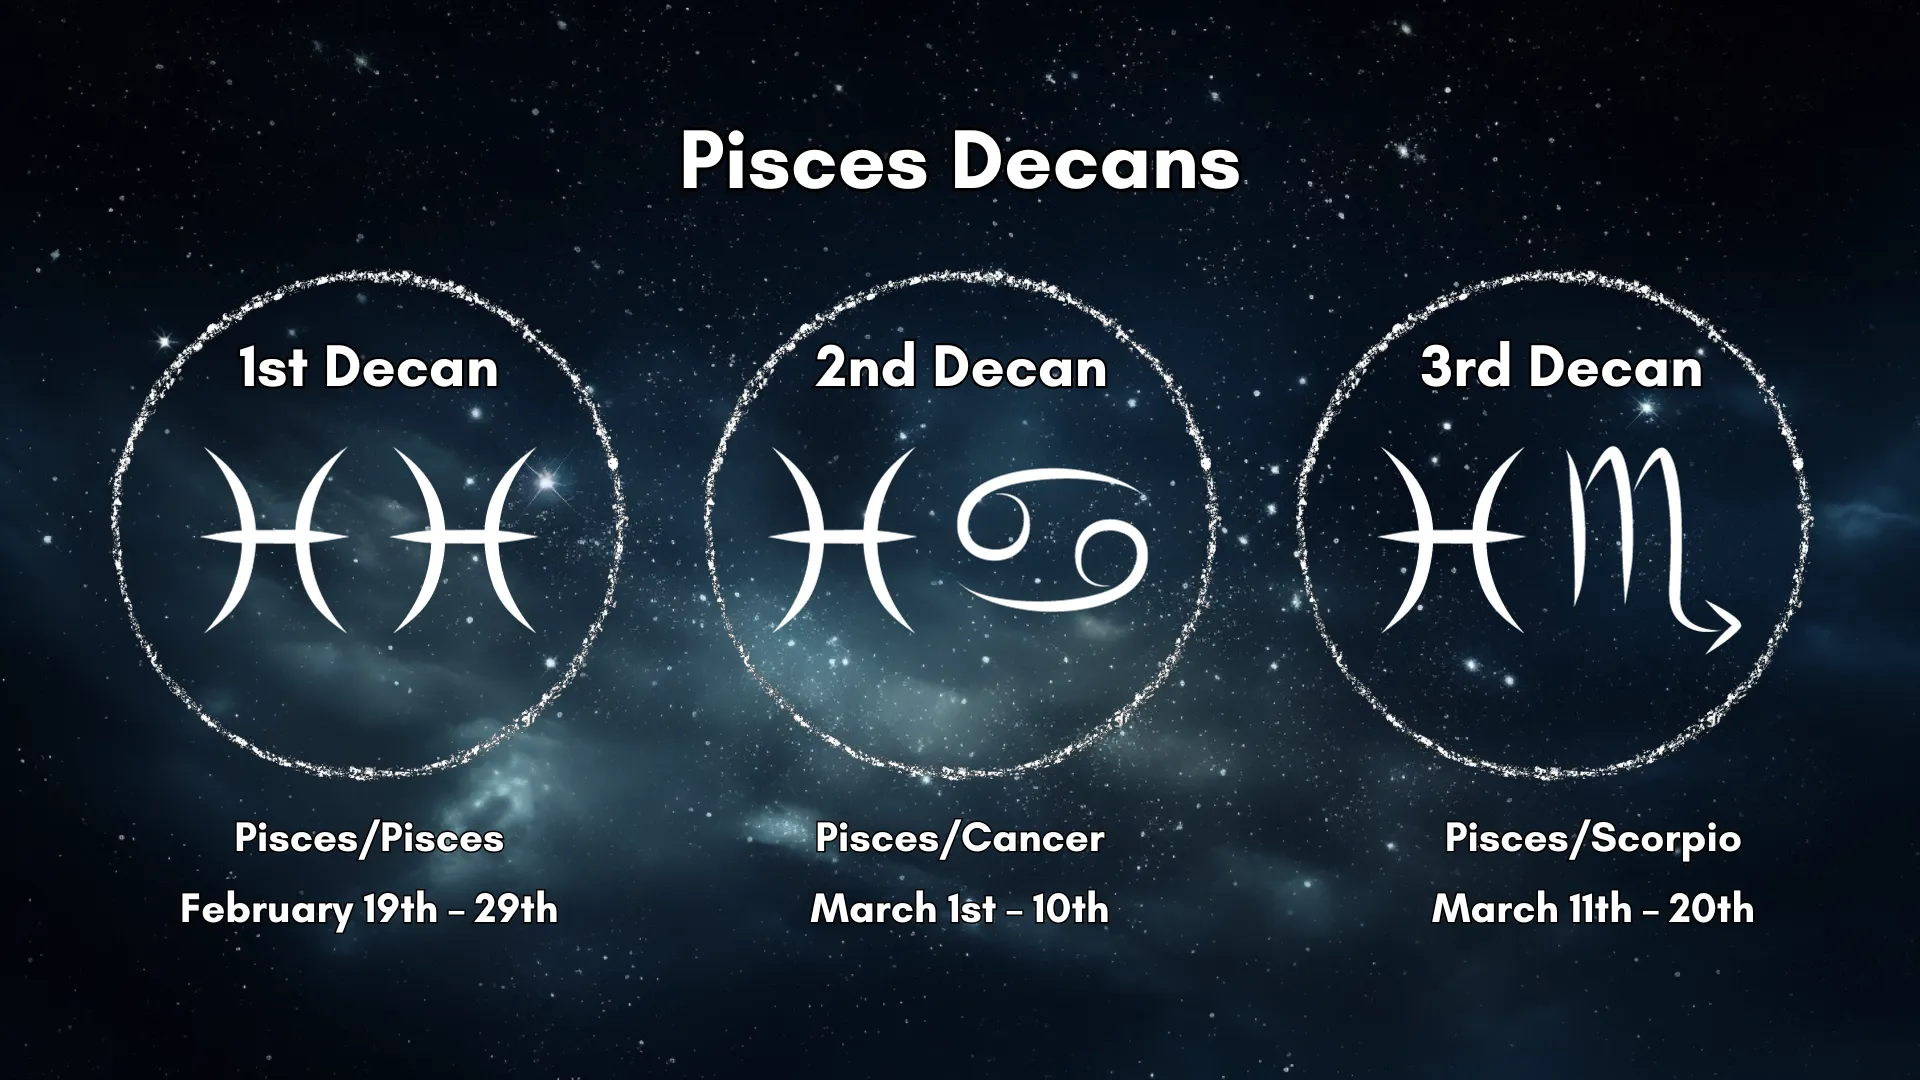 The Pisces Decans are laid out in a chart that is easy to understand.